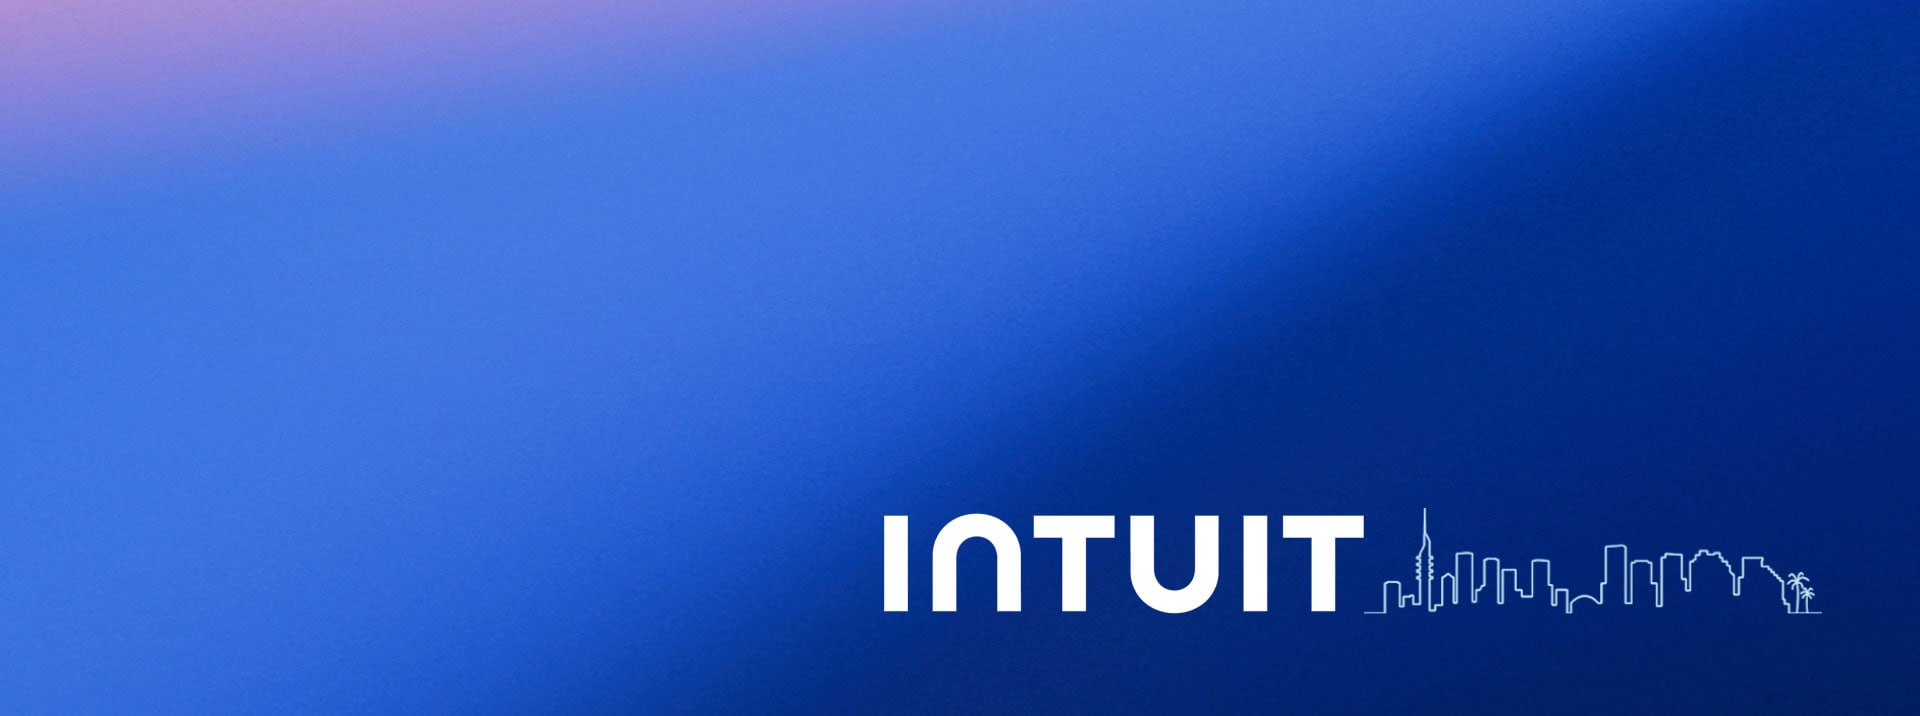 A gradient background with Intuit logo